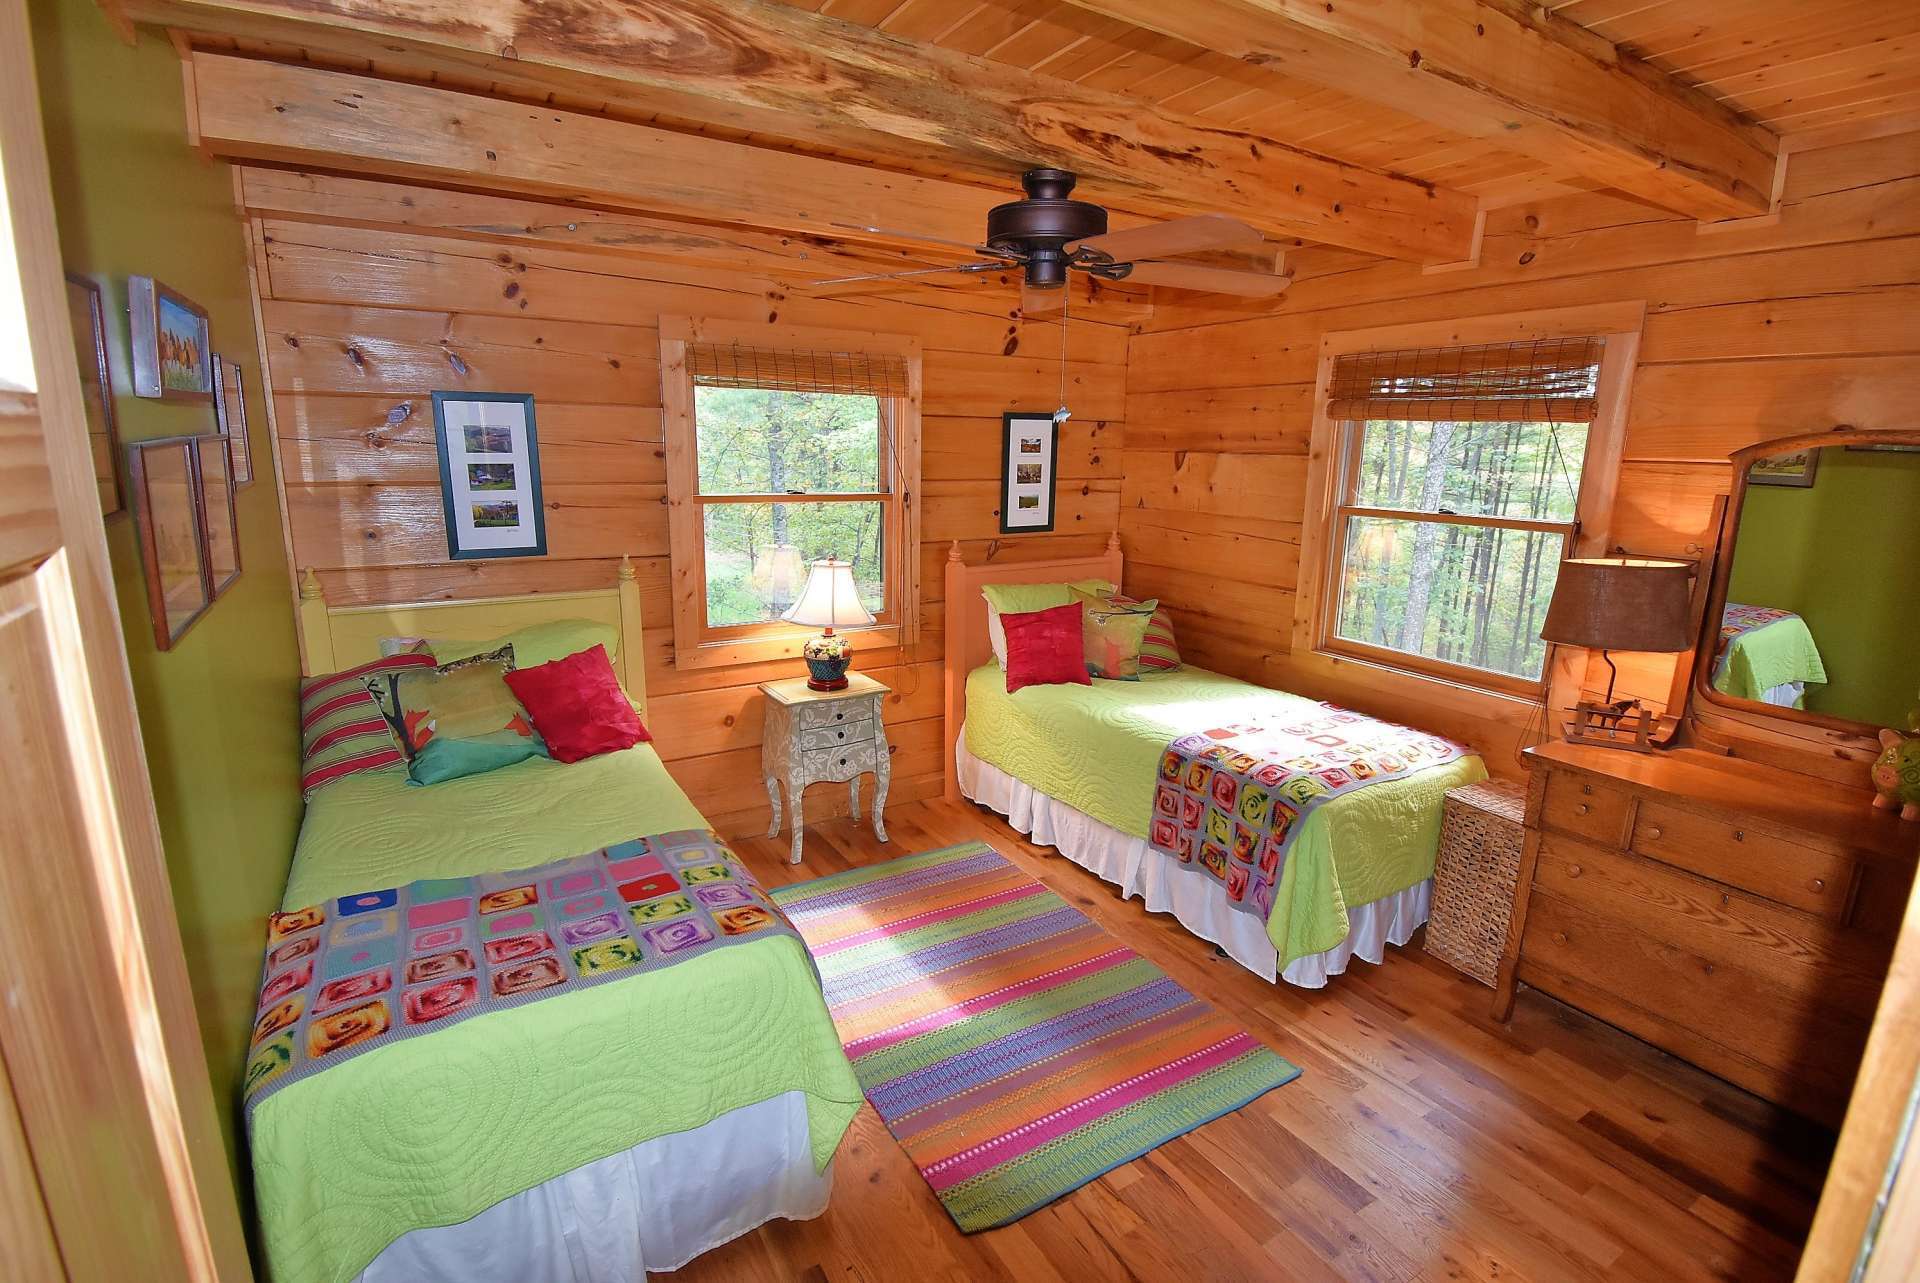 The main level guest bedroom is also spacious with wood floor. Both bedrooms share a full bath.